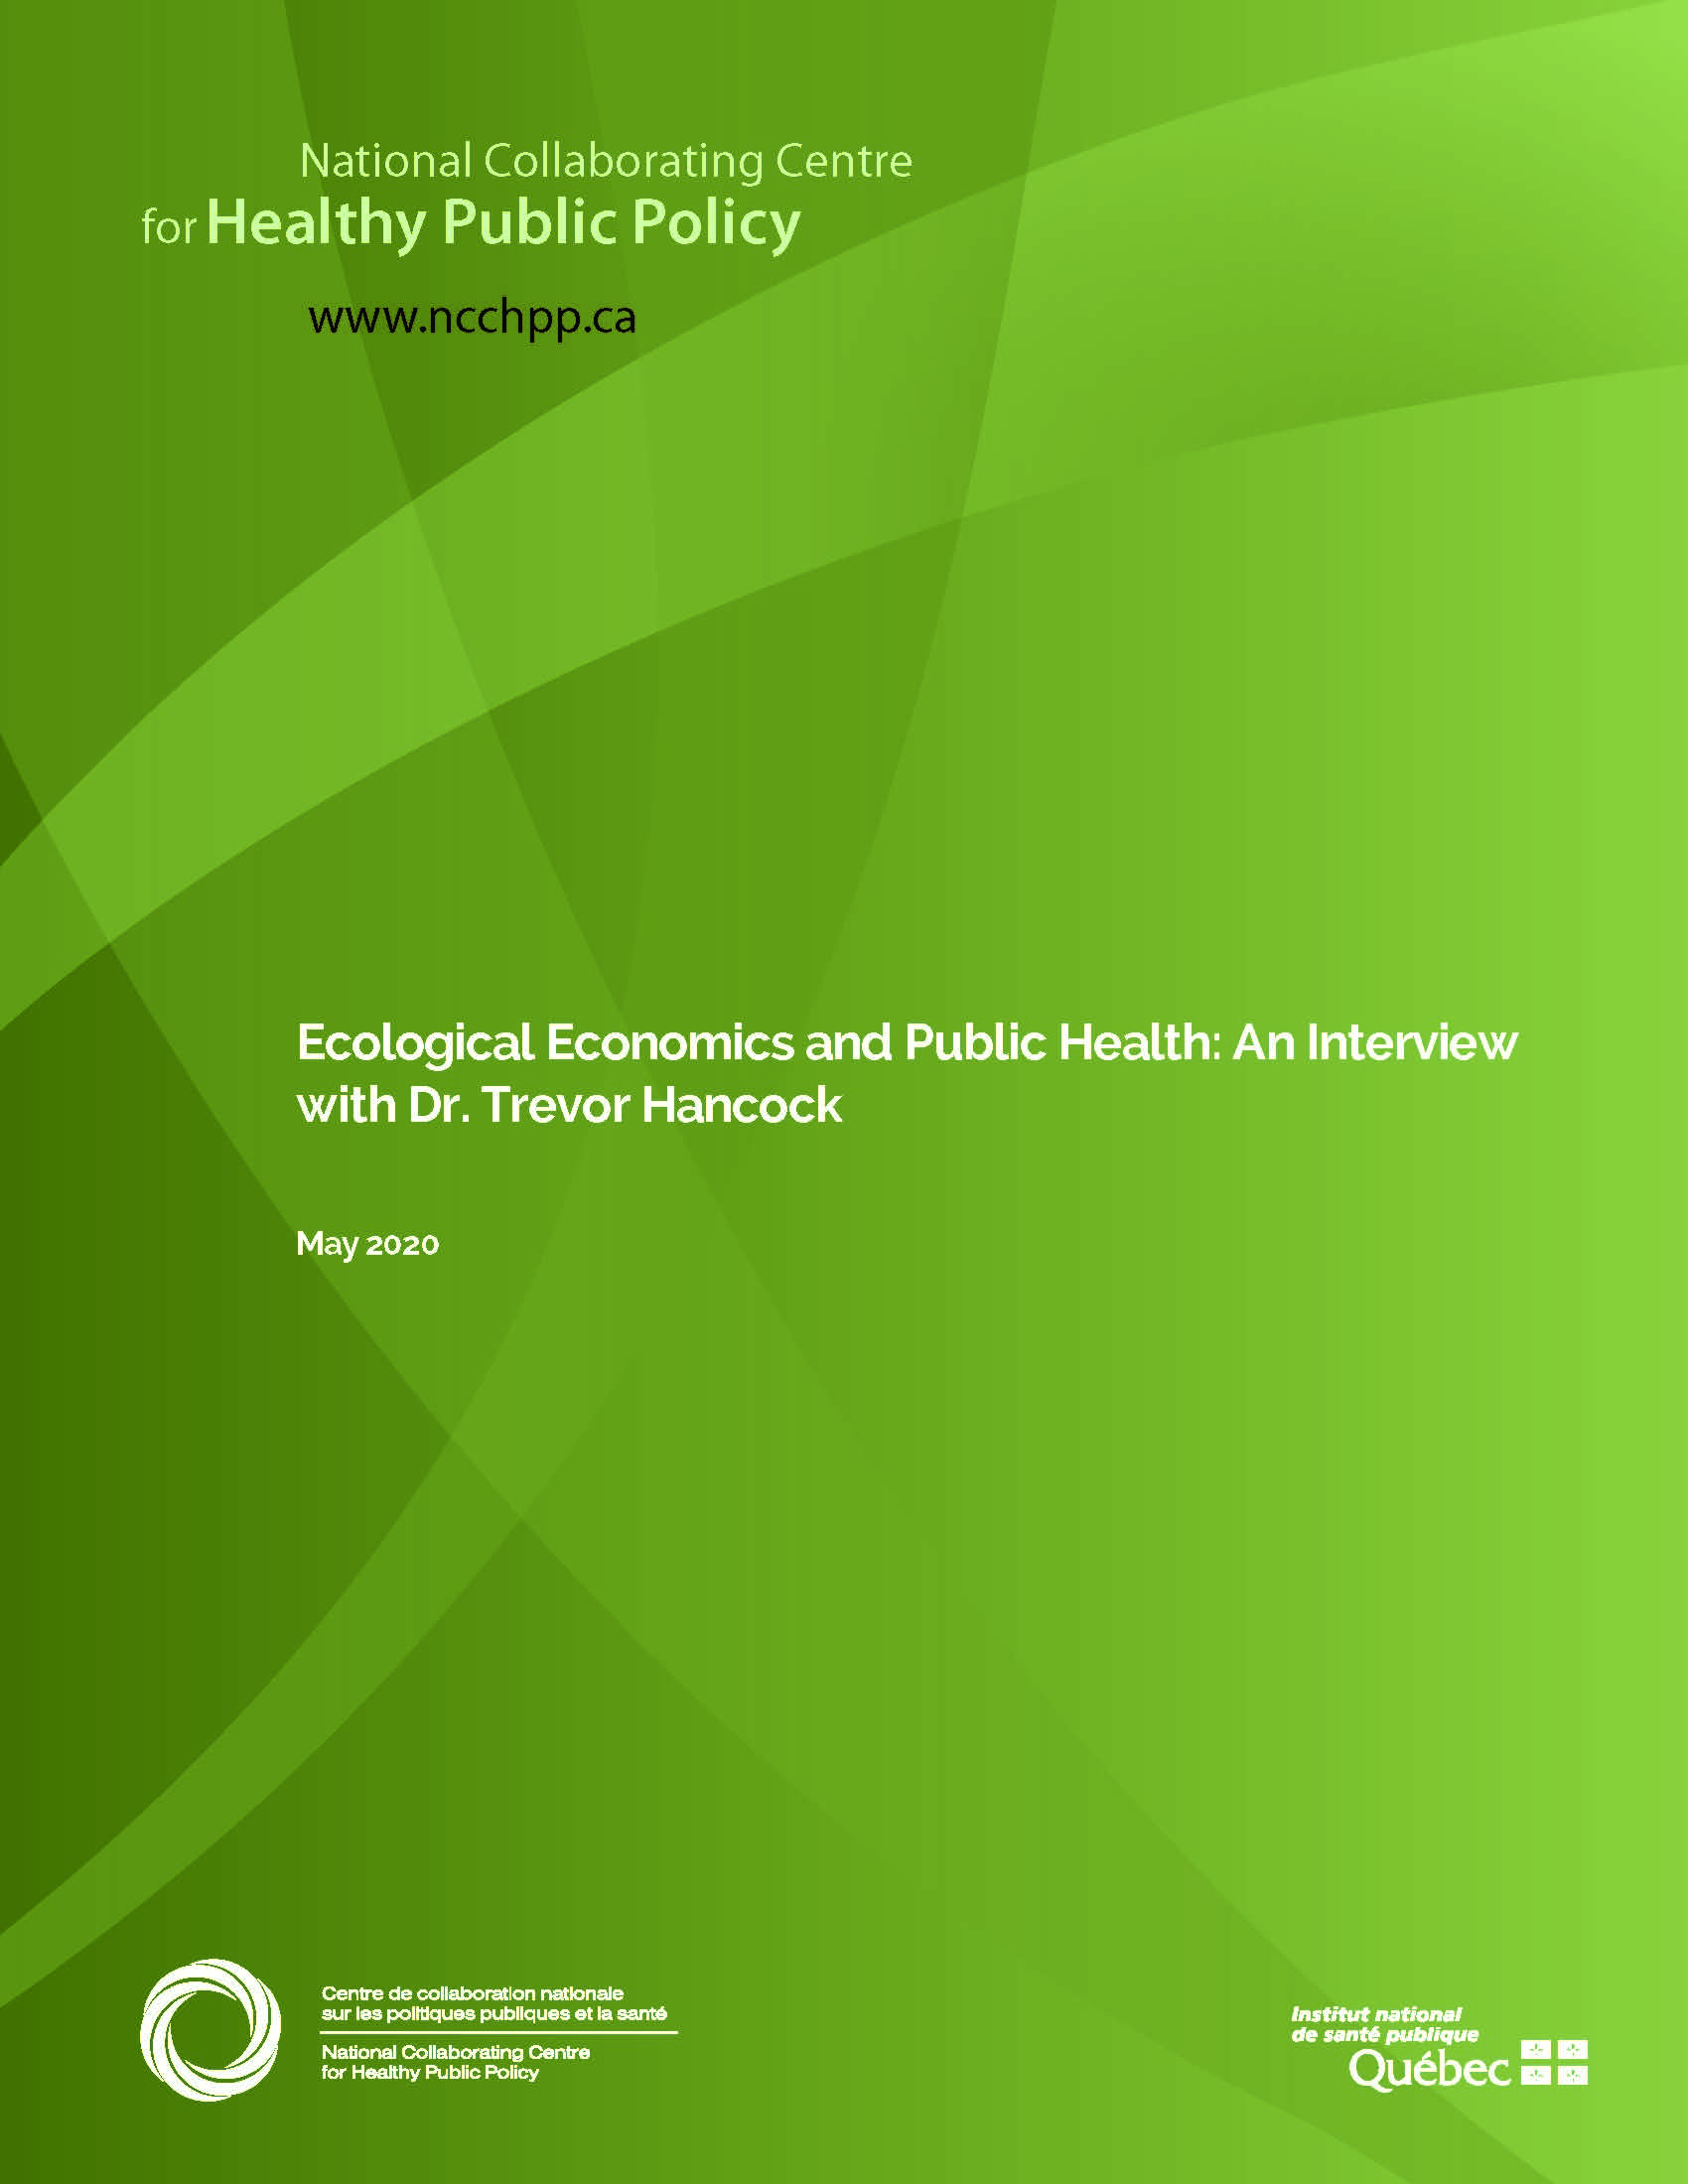 Ecological Economics and Public Health: An Interview with Dr. Trevor Hancock